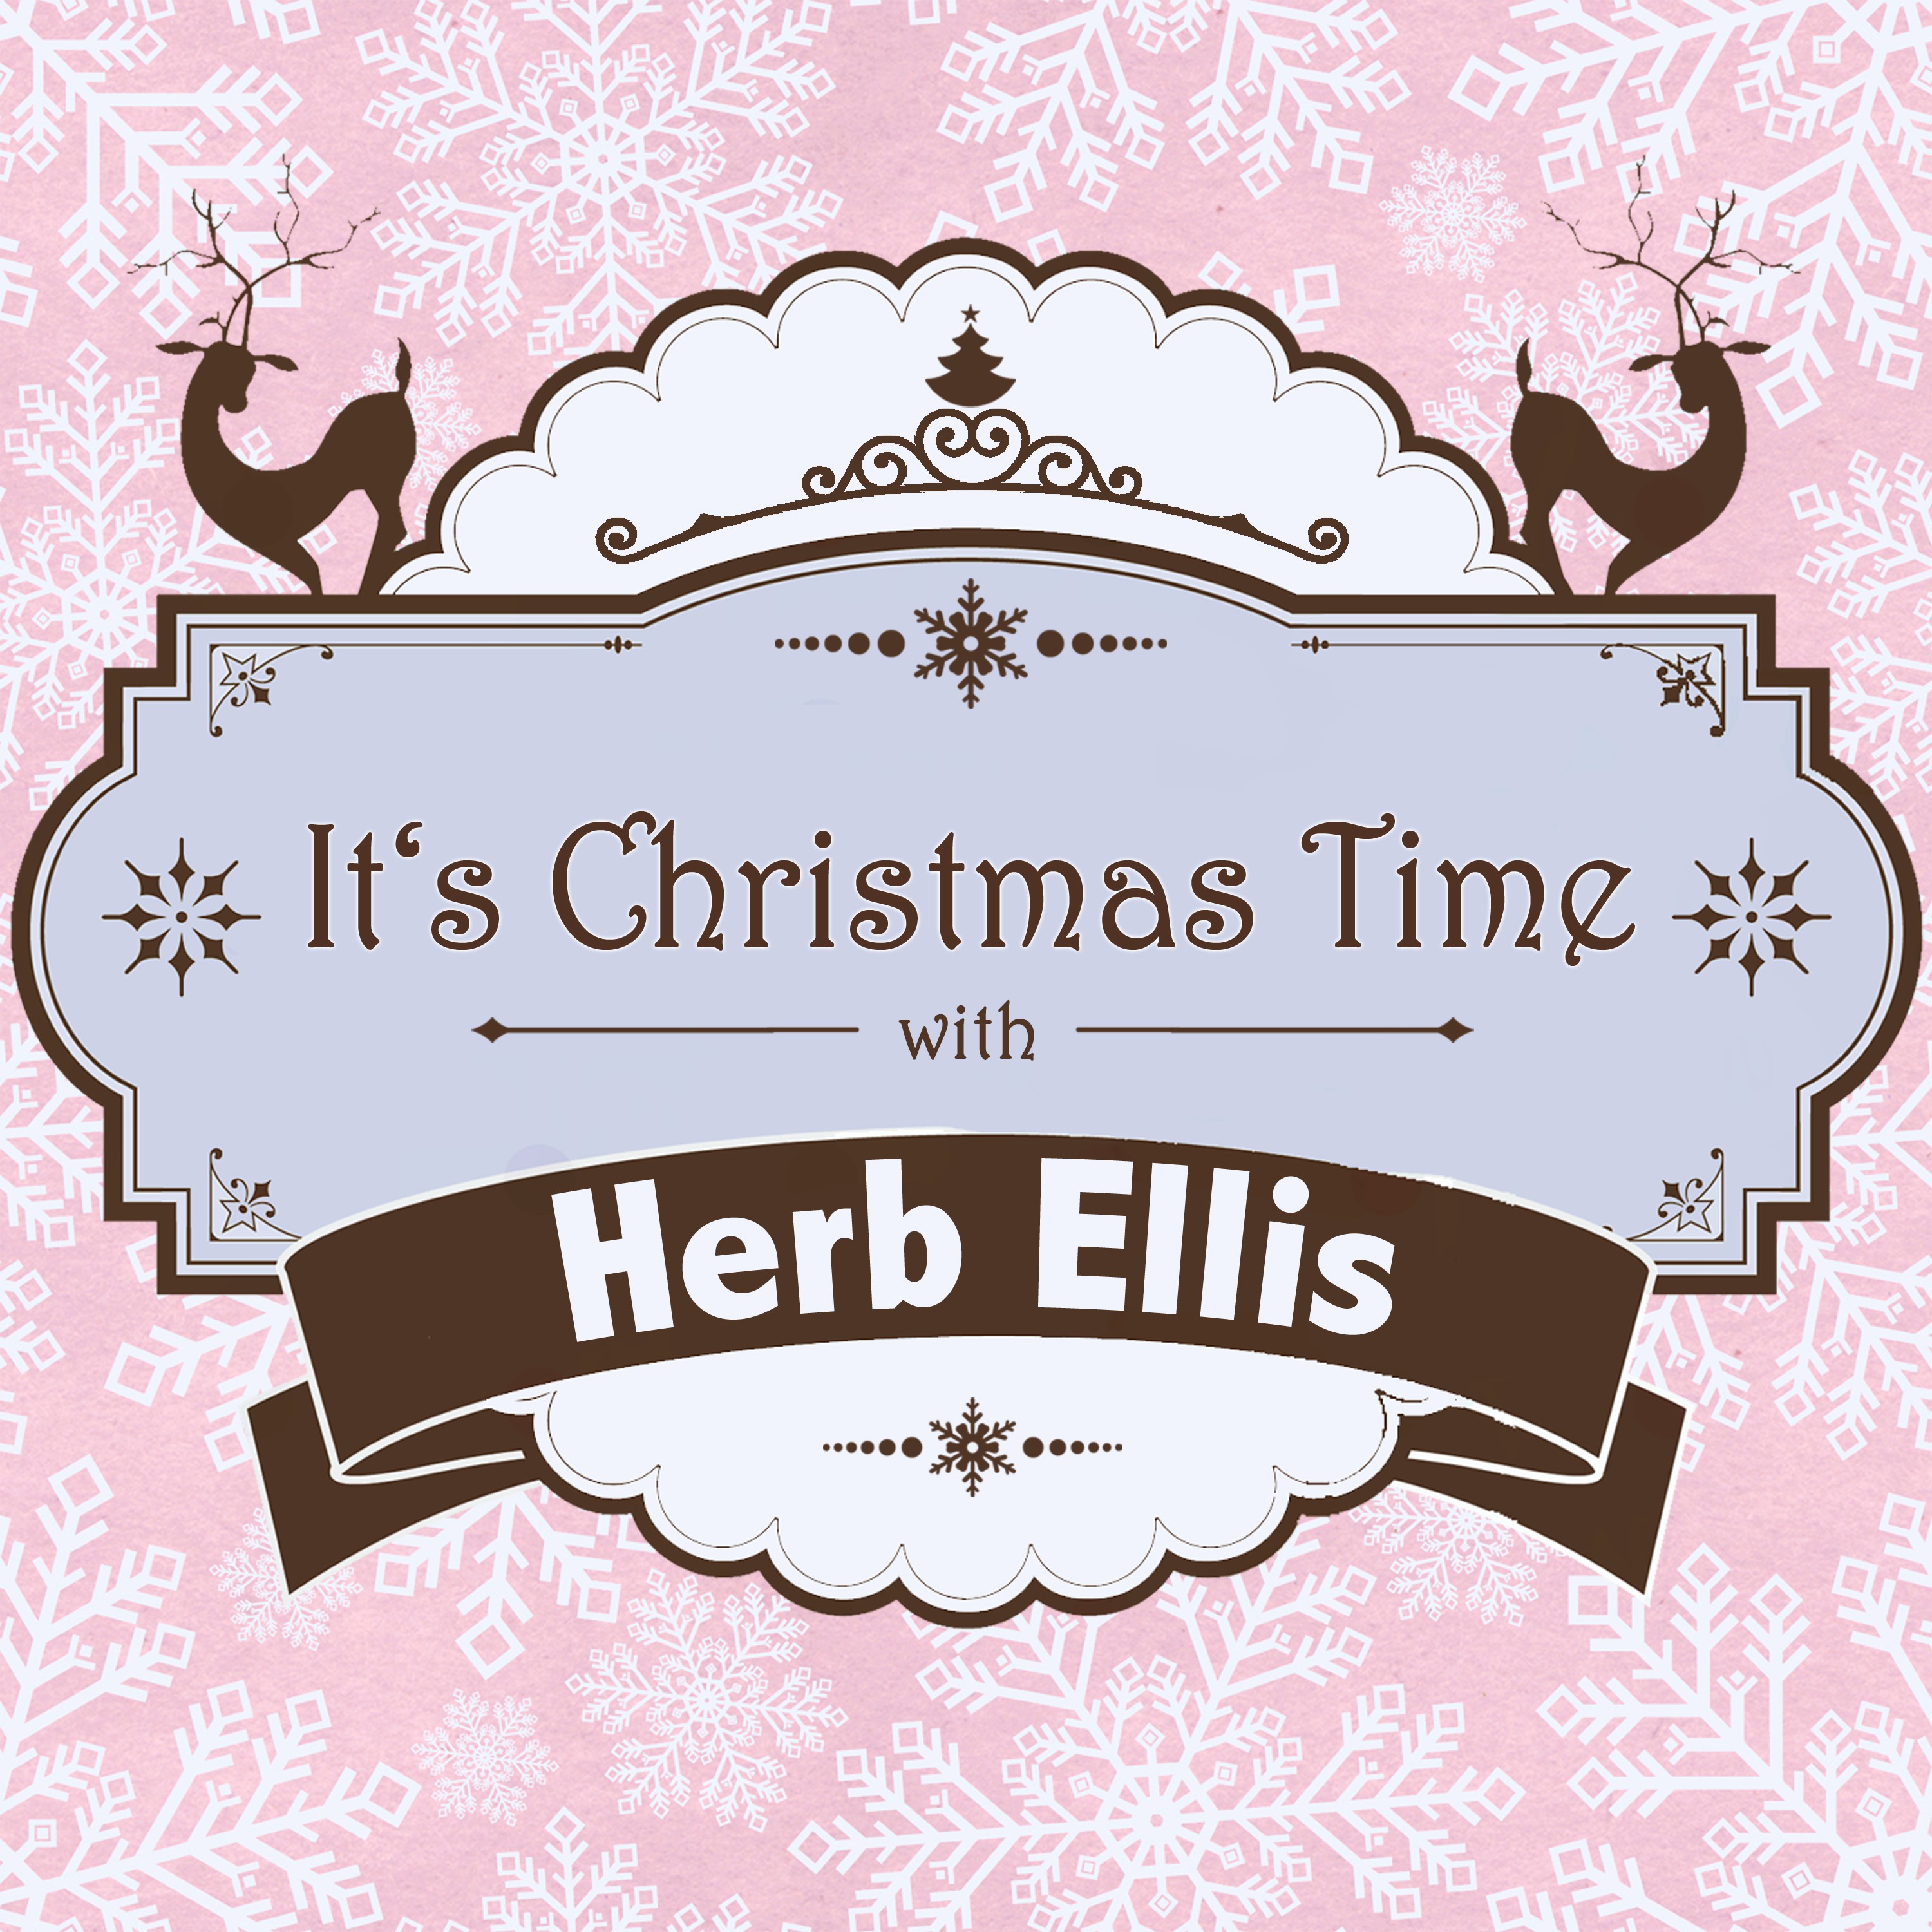 It's Christmas Time with Herb Ellis